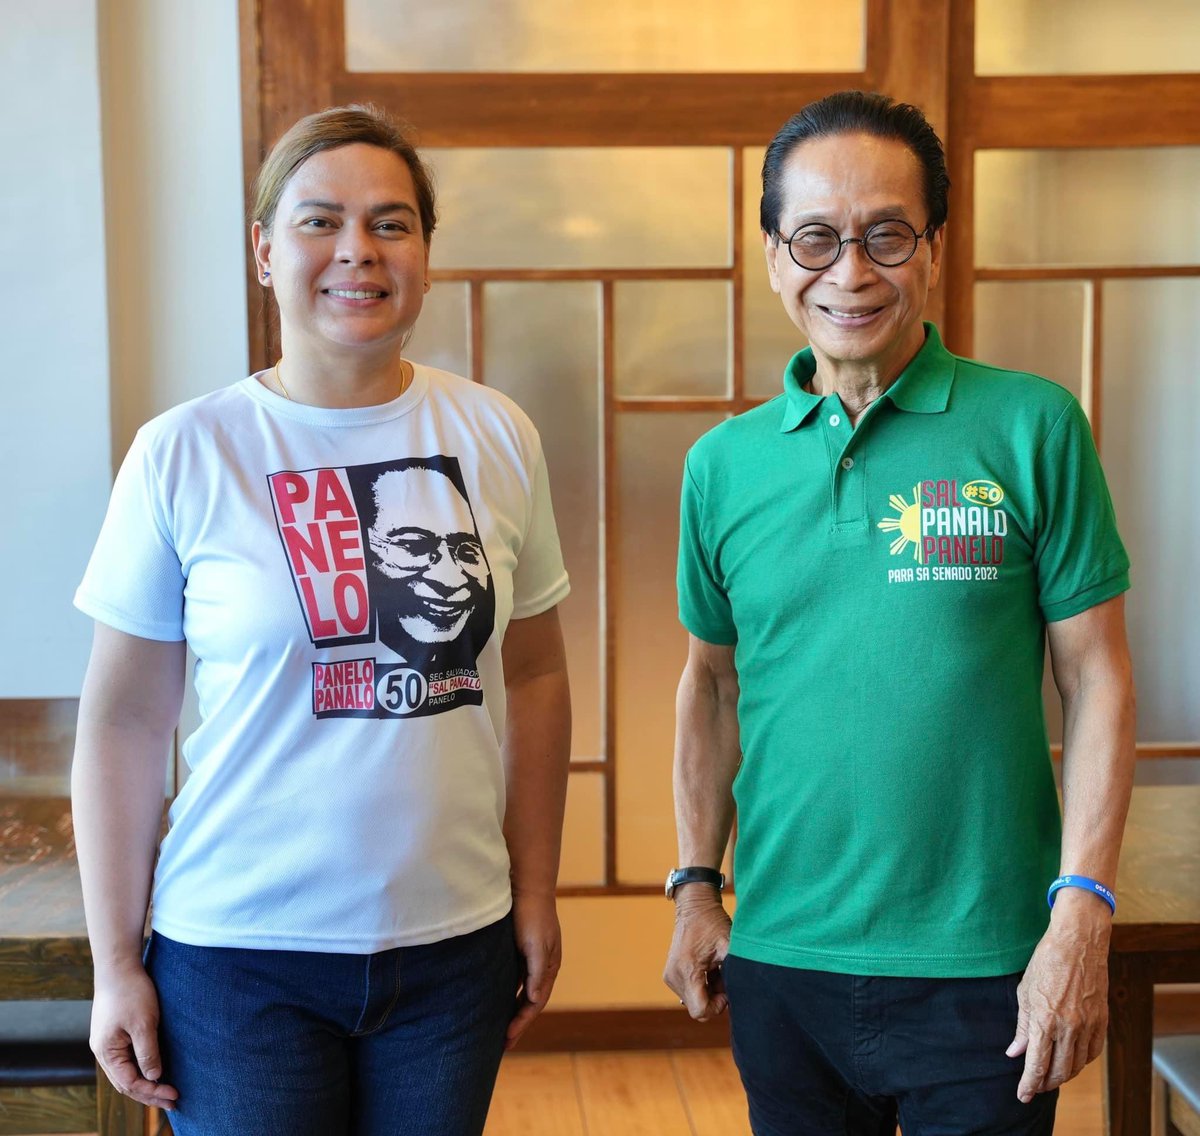 My most heartfelt thanks to the next Vice President of the Philippines, Inday Sara Duterte, for your endorsement and support! 👊🏽🇵🇭 You’re such a blessing to our advocacy and campaign! 🙏🏽

#MahalinNatinAngPilipinas #AngPWDDaptVIP #PaneloPanaloSenado #50SalPanaloPanelo